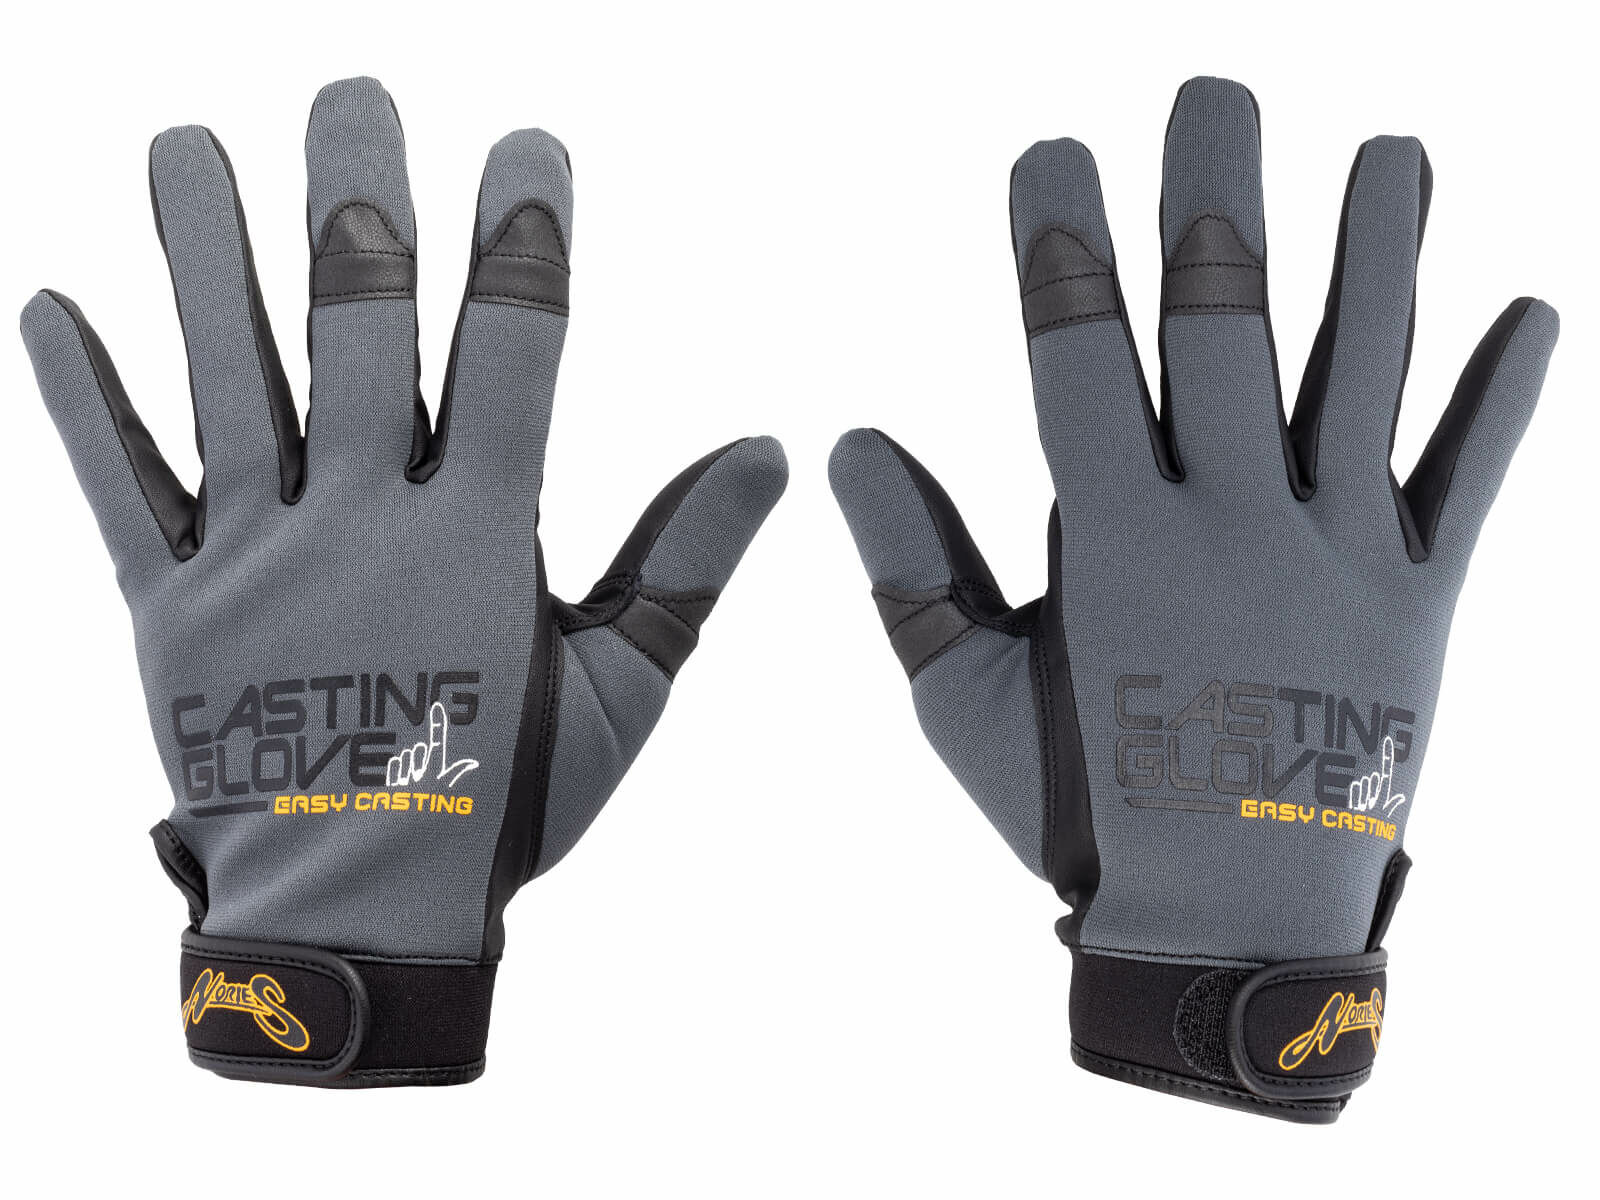 NORIES Casting Gloves NS-03 Gray Size L